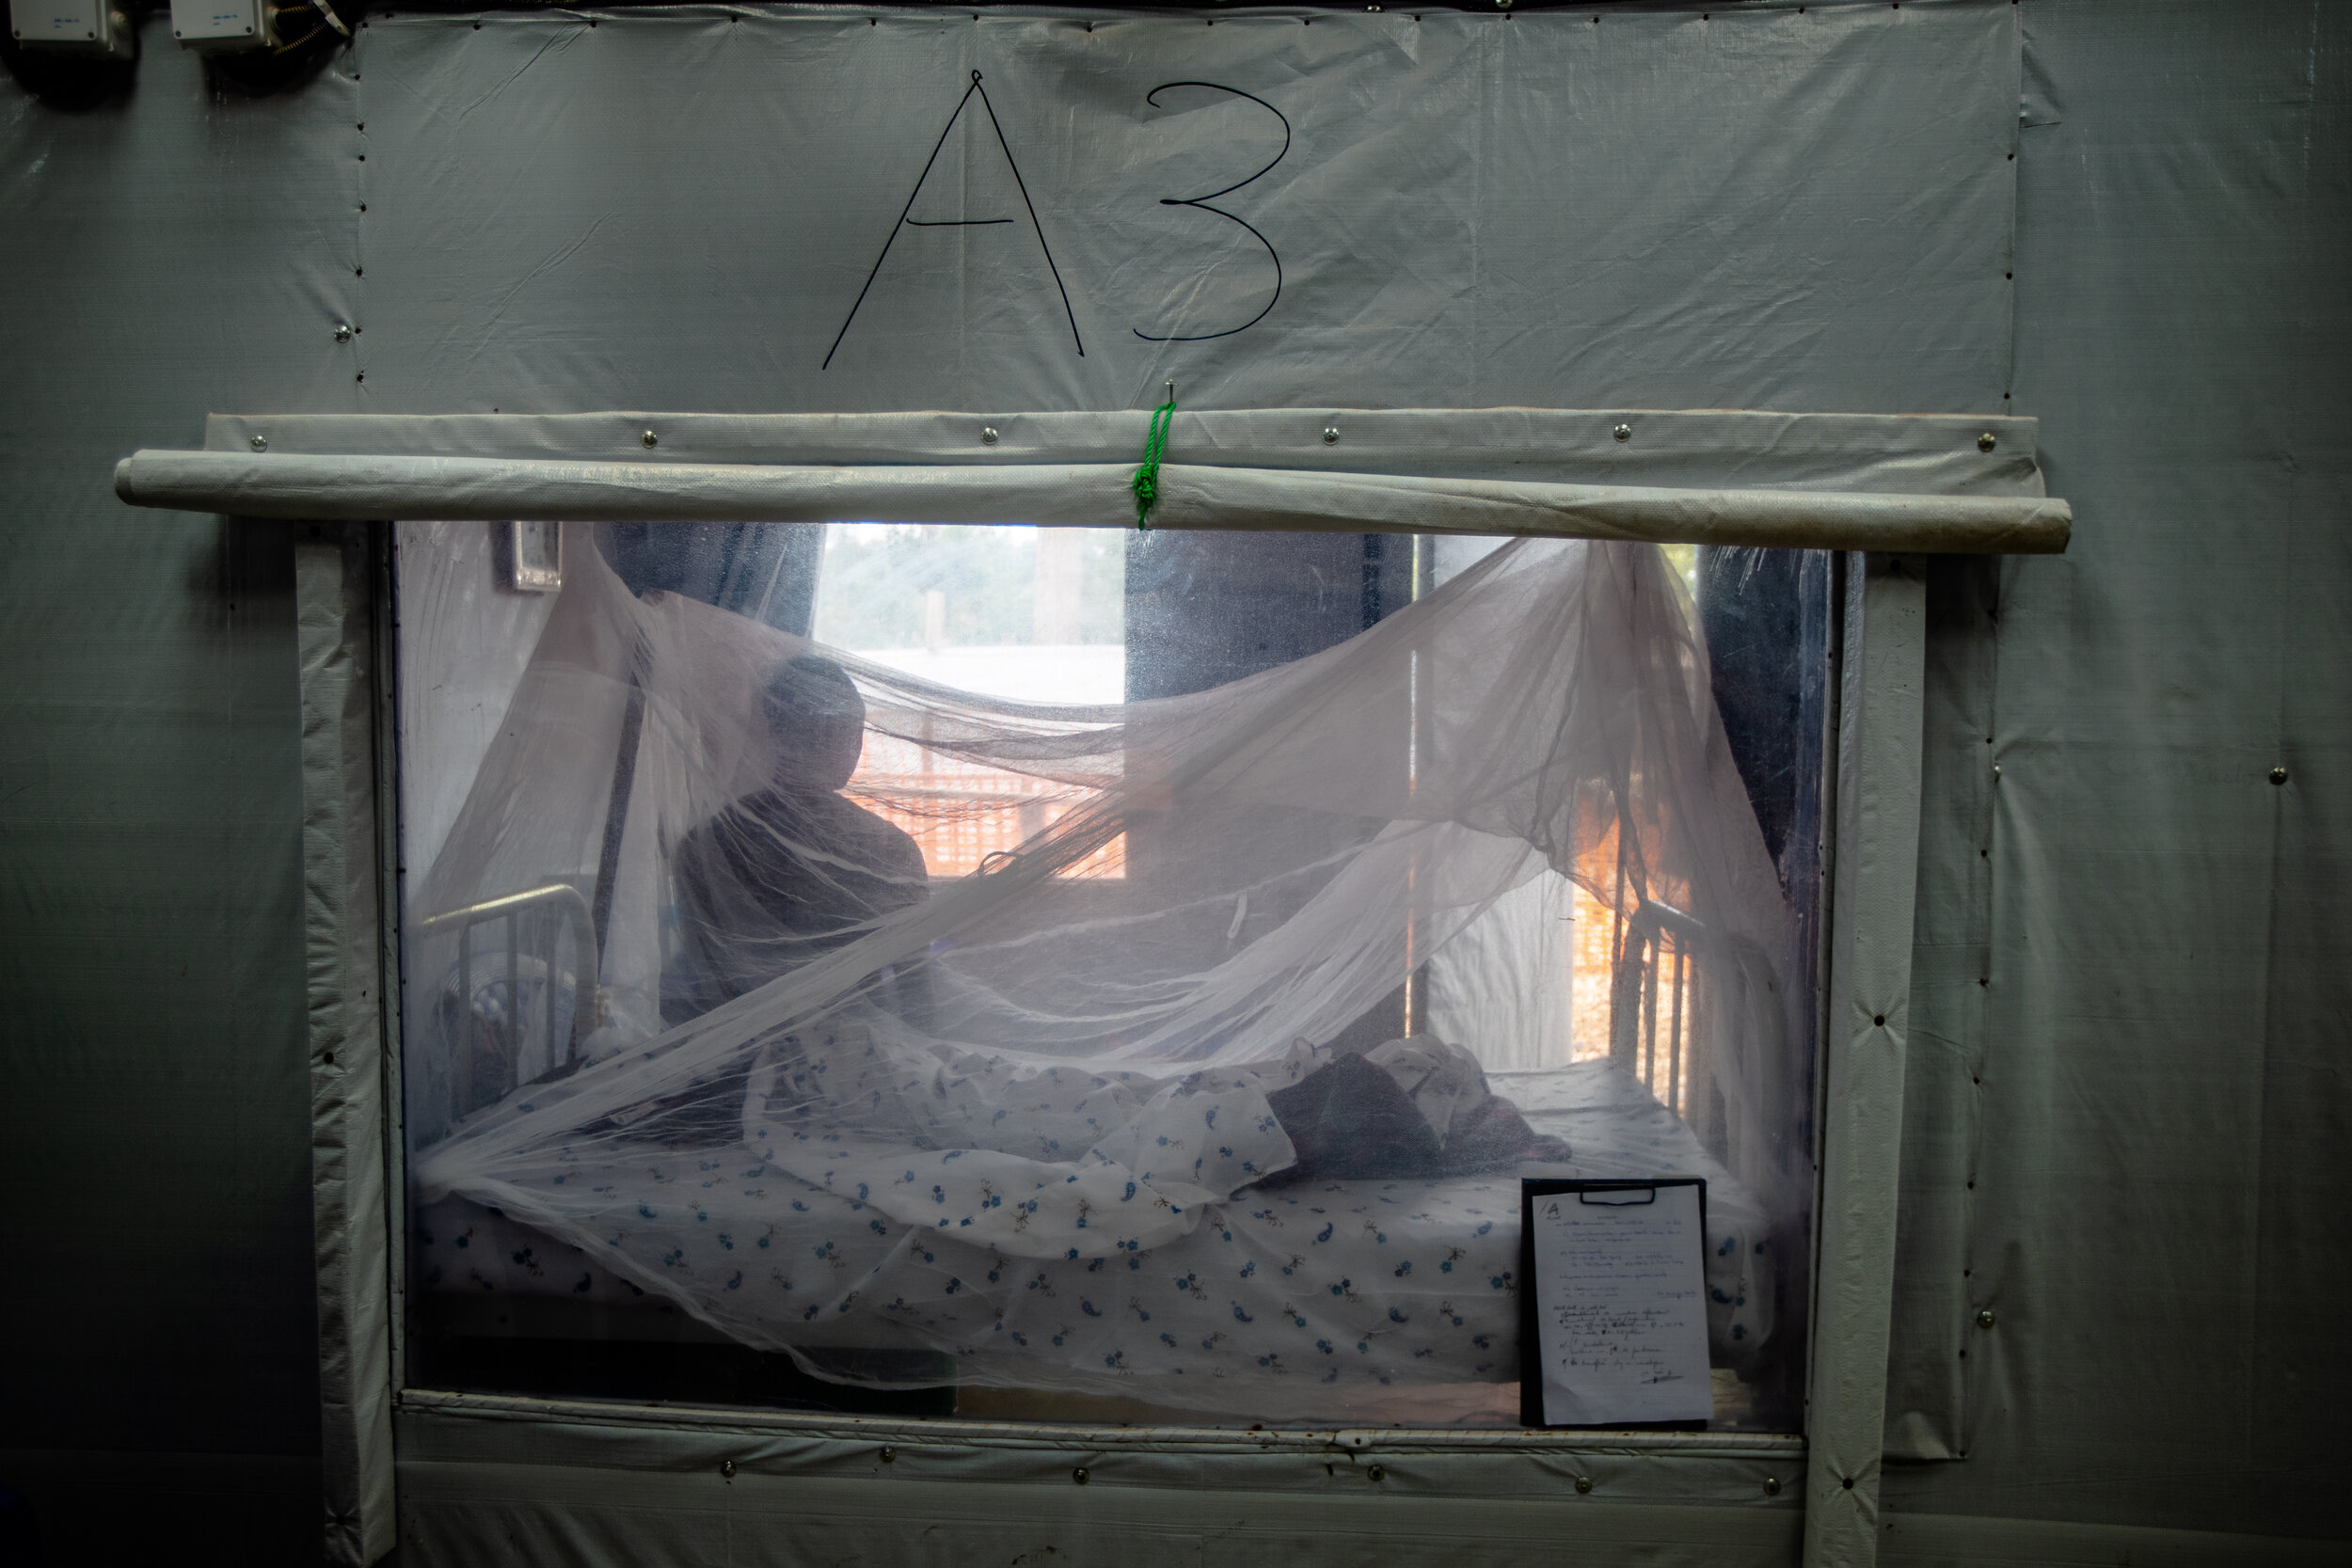  a patient in the recovery room, at Katwa Ebola treatment center, The Democratic Republic of Congo, 2019 